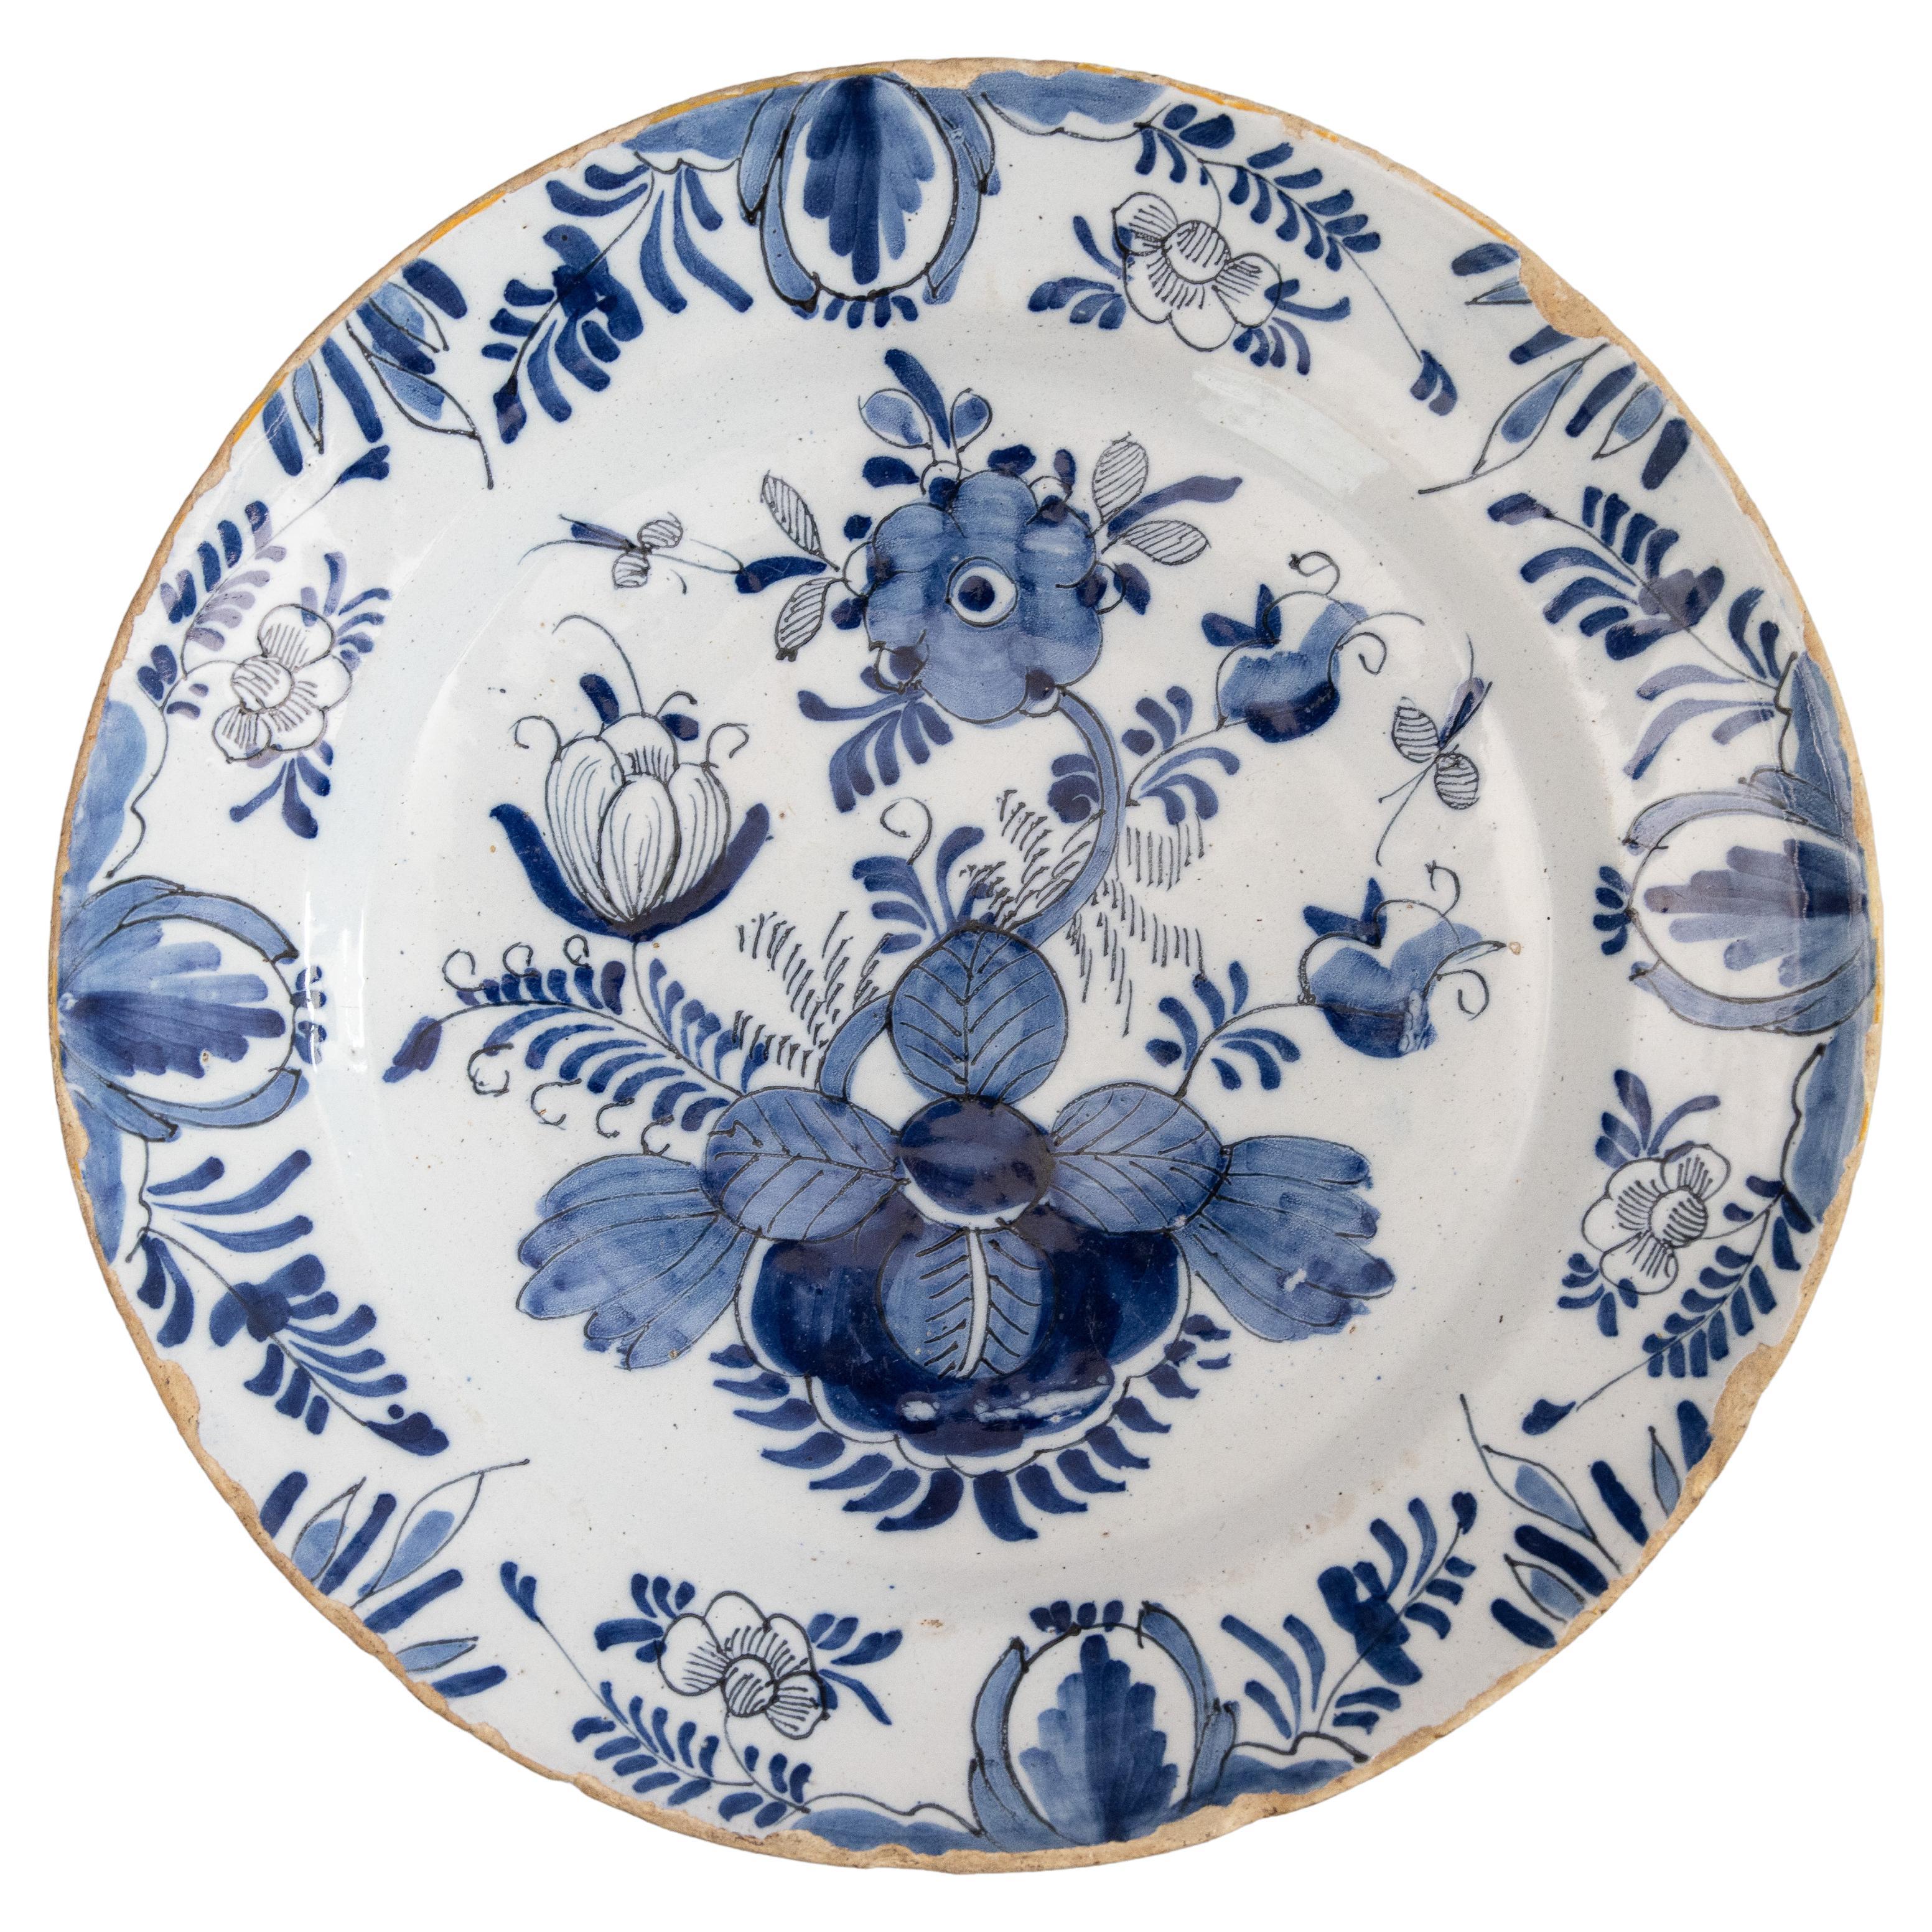 18th Century Dutch Delft Faience Floral Charger